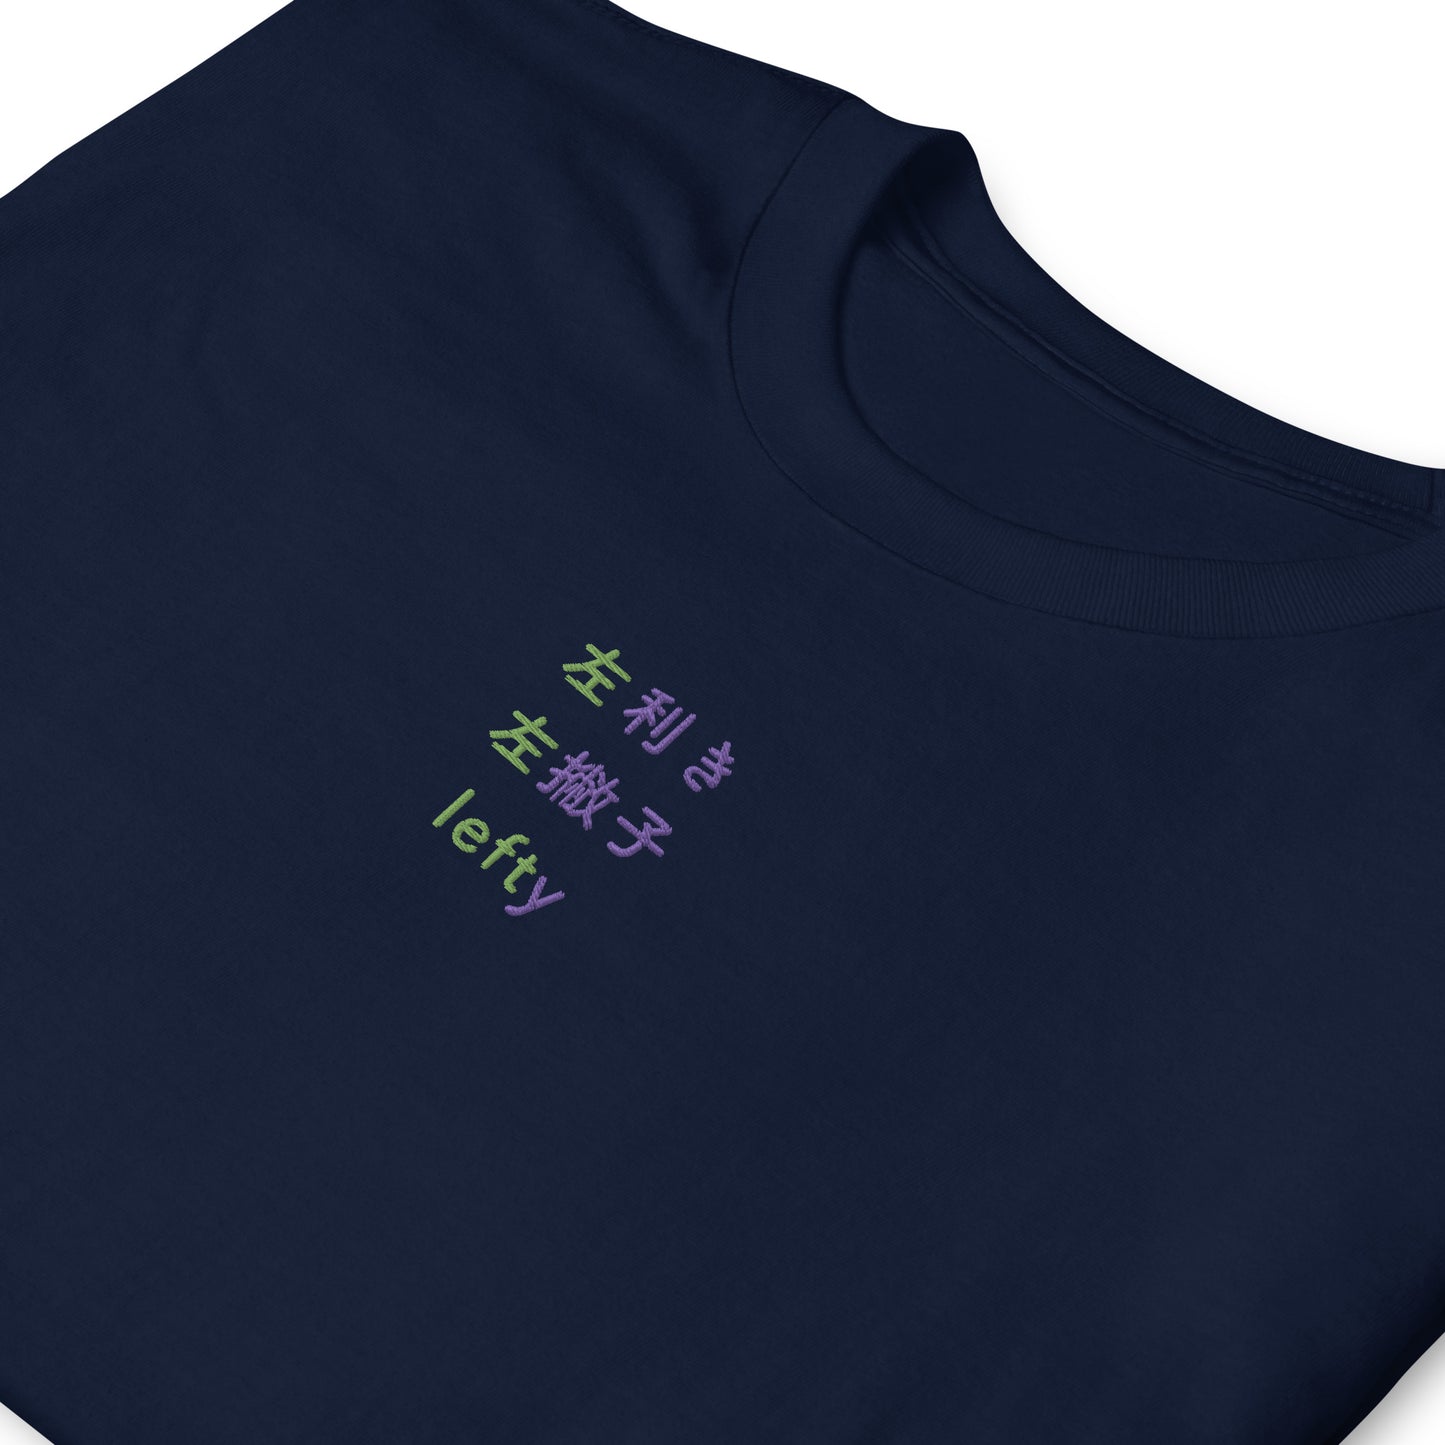 Navy High Quality Tee - Front Design with an Green, Purple Embroidery "Lefty" in Japanese,Chinese and English